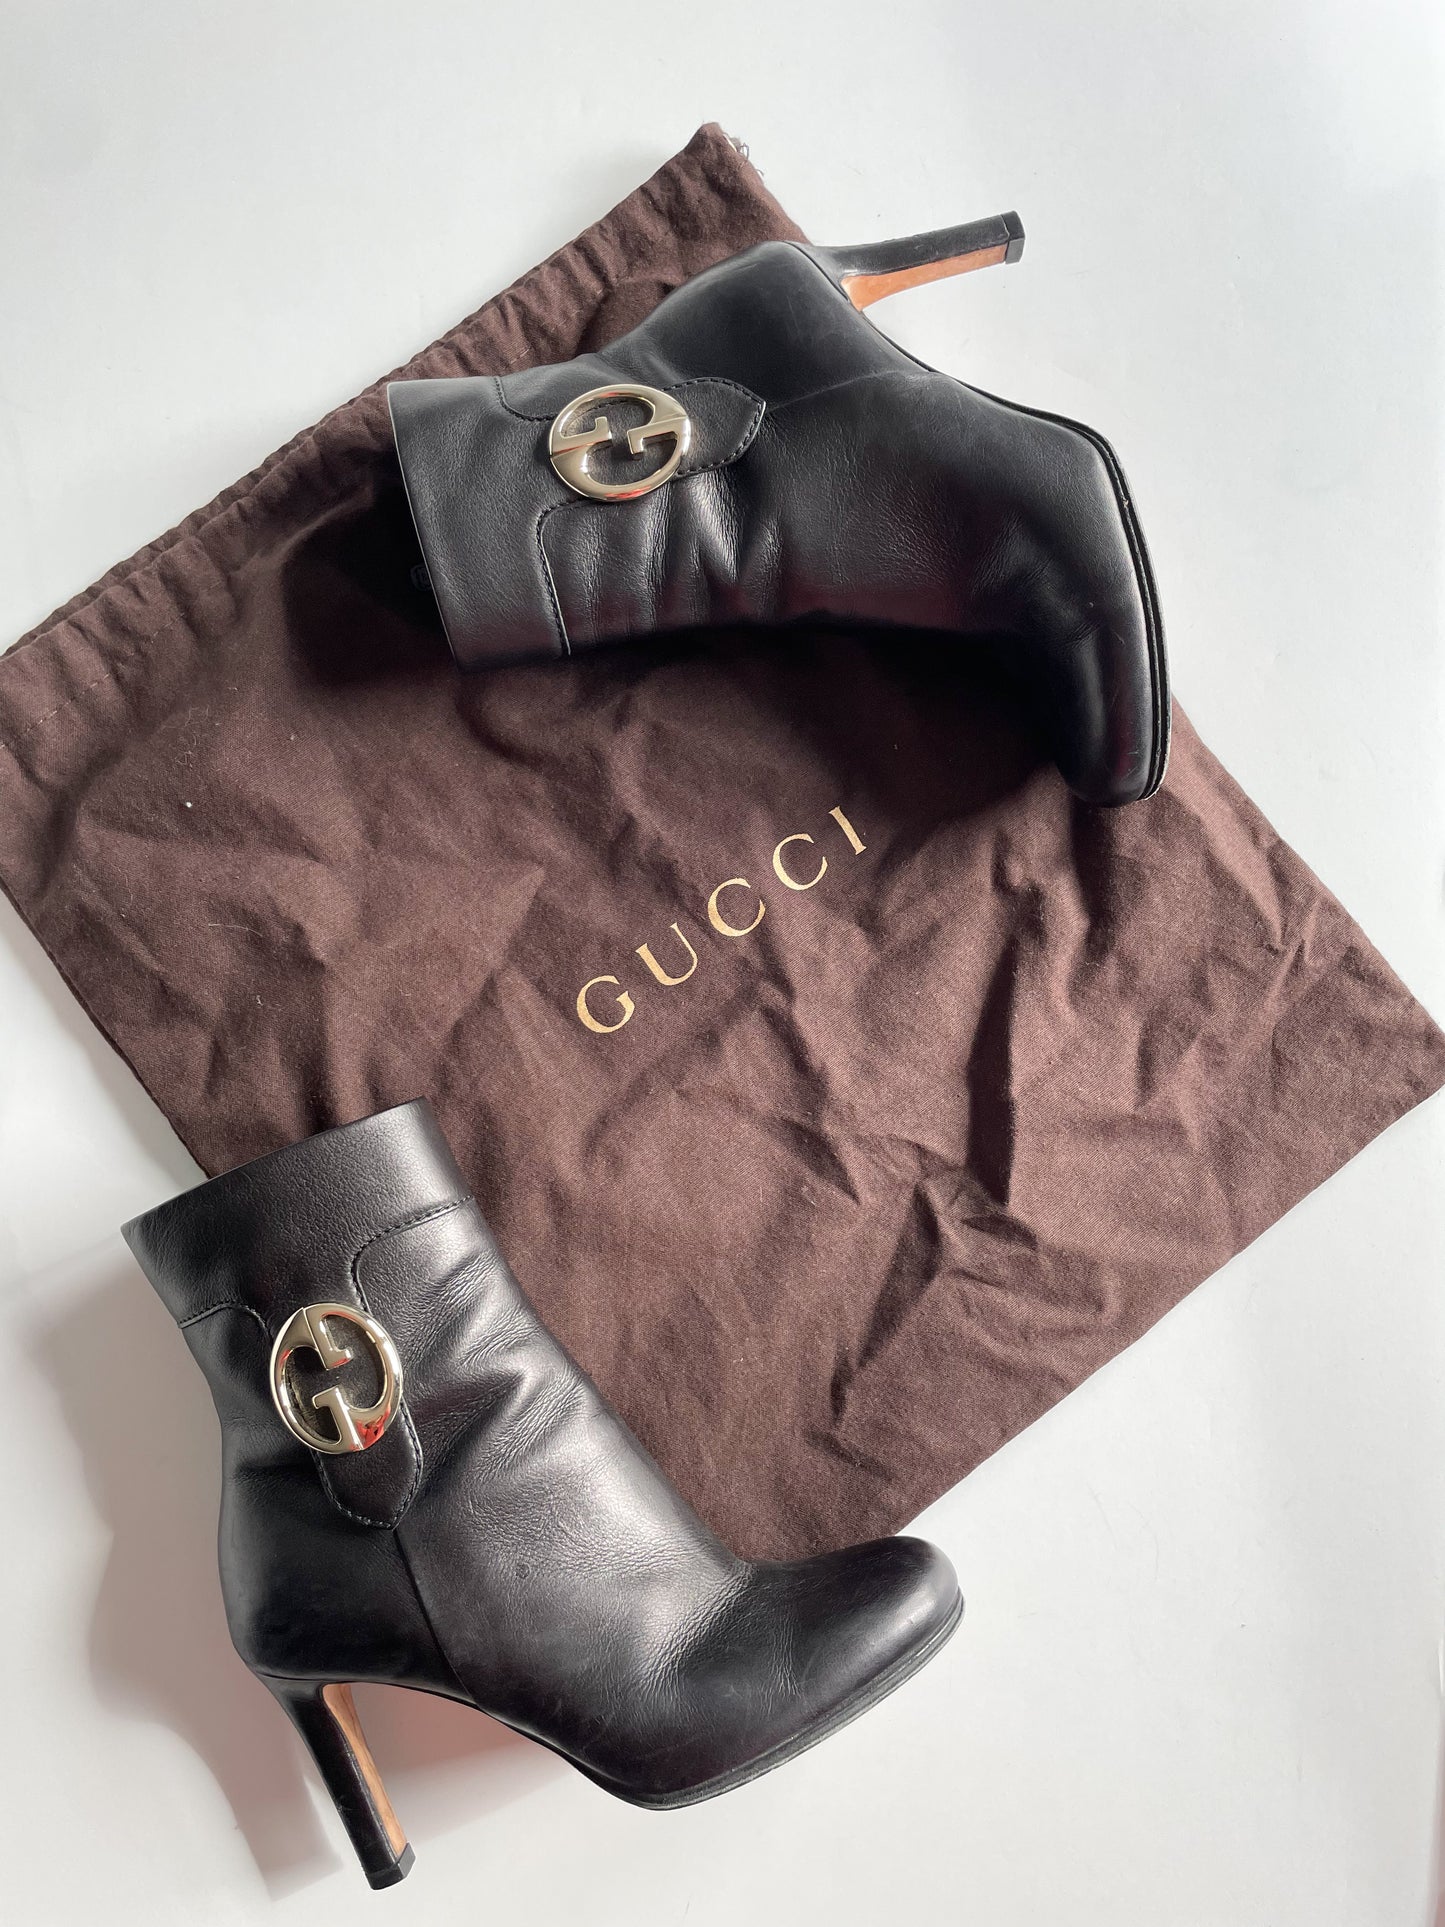 GUCCI Black Leather Ankle Boot Heel - Size 35